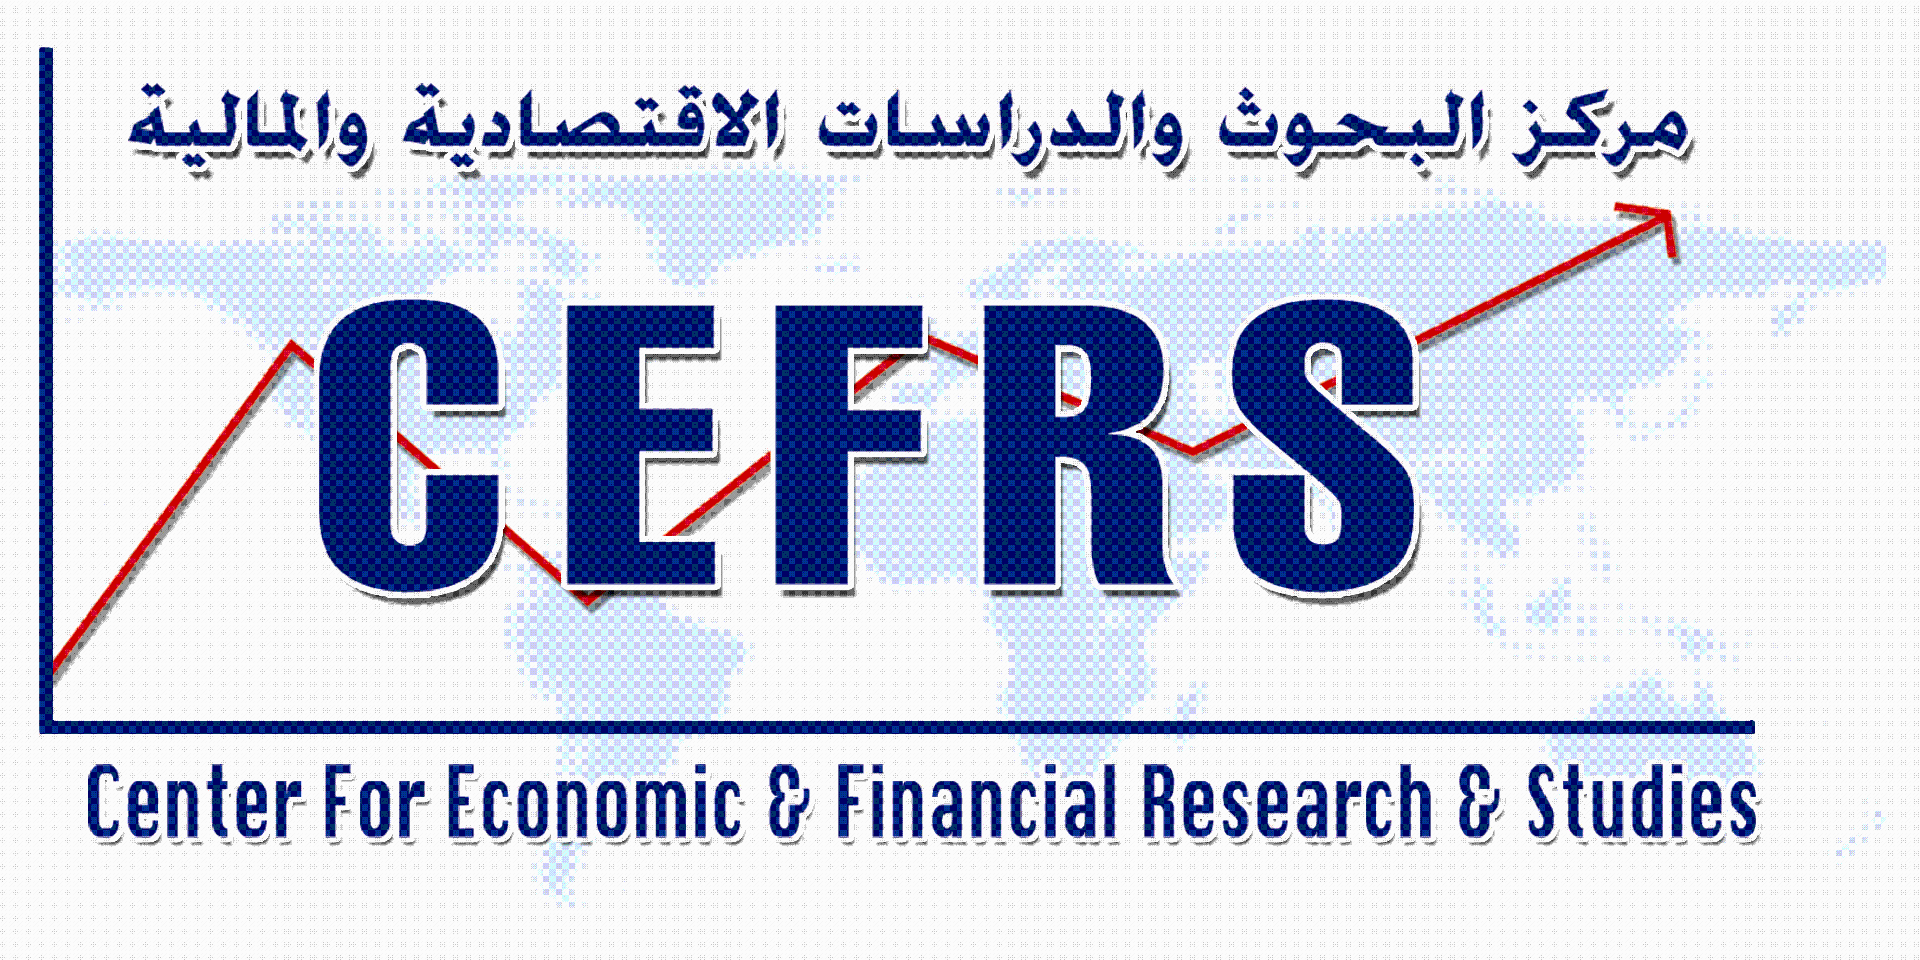 Center for Economic & Financial Research and Studies (CEFRS)